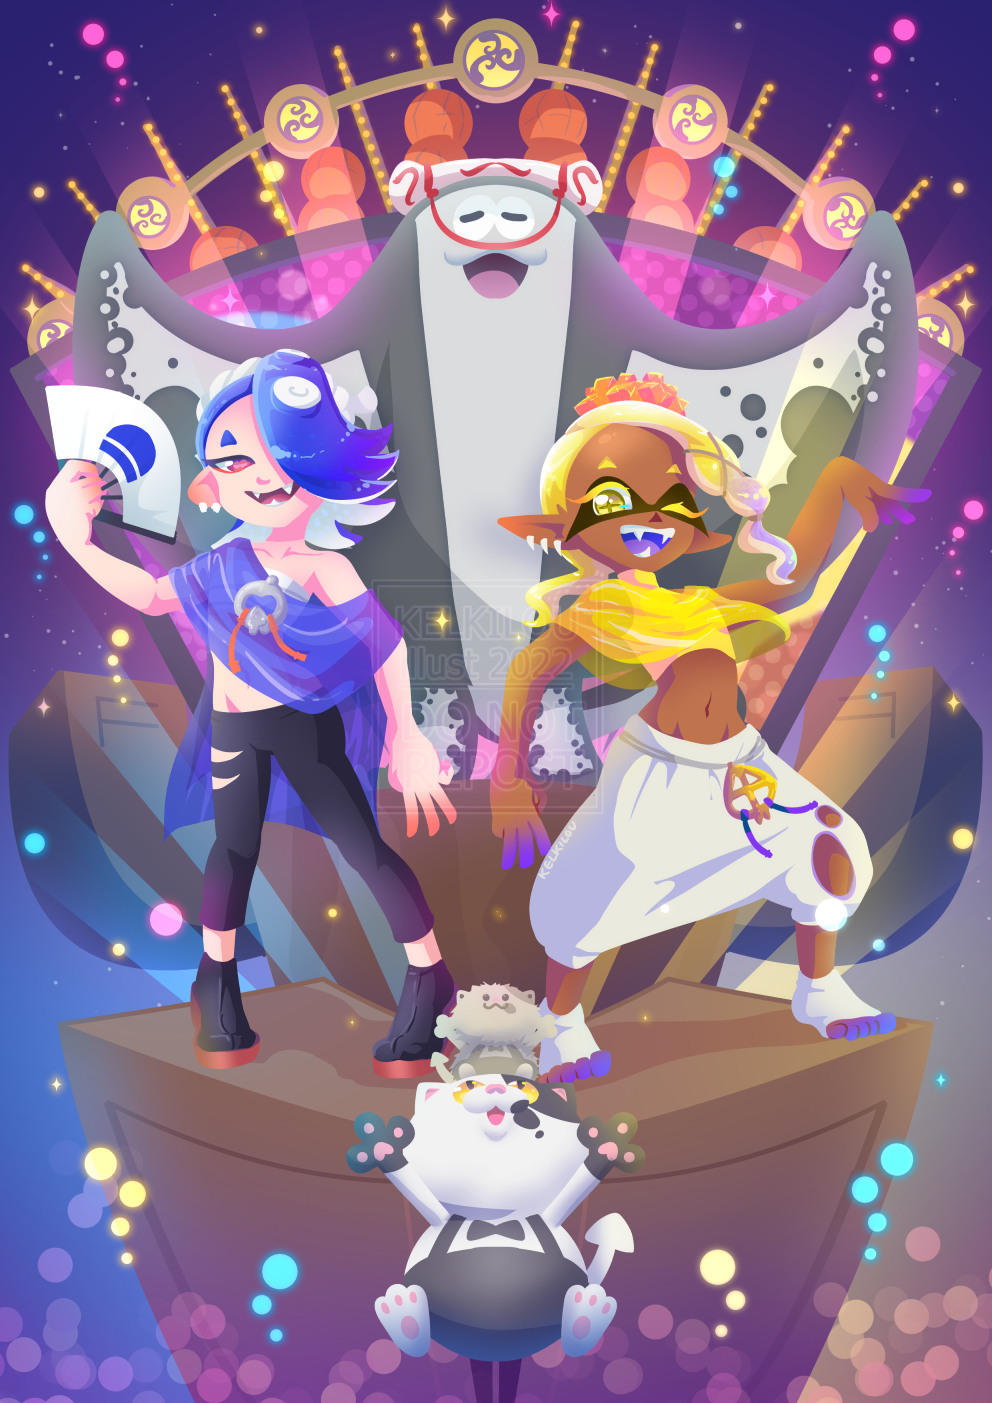 Naturally, I just had to do a Splatfest print for Deep cut! I love those floating stages *n*
(I was worried my little Samsung tablet wouldn’t be able to handle working on a piece this big, but it did!! ;o; )
Prints of these will be available at Rai...